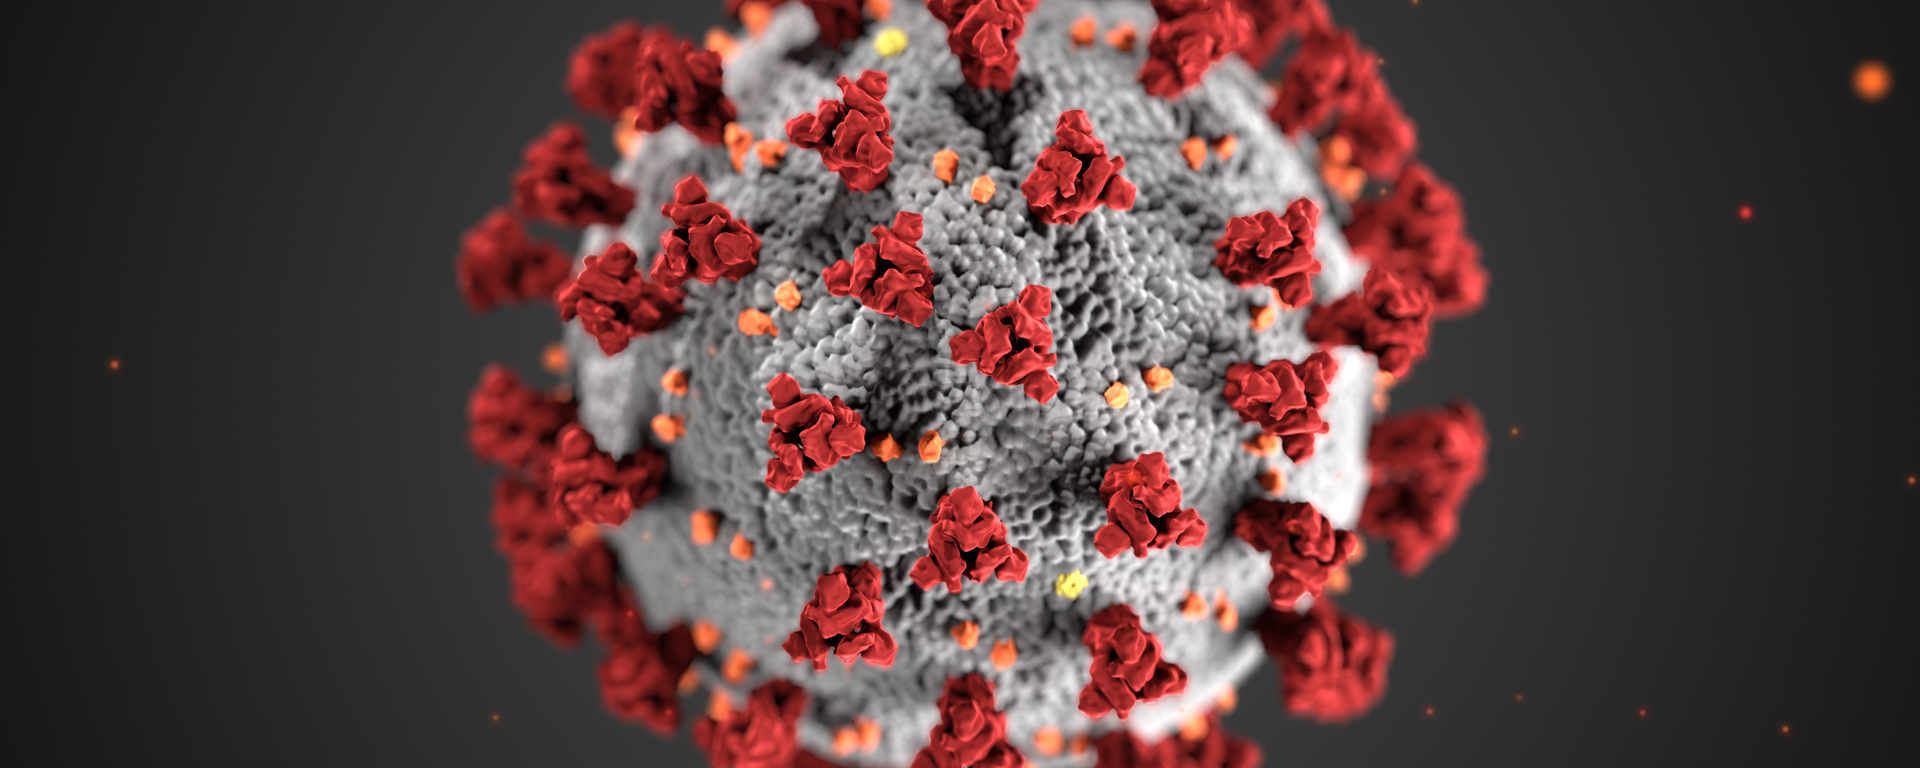 This illustration, created at the Centers for Disease Control and Prevention (CDC), reveals ultrastructural morphology exhibited by coronaviruses. Note the spikes that adorn the outer surface of the virus, which impart the look of a corona surrounding the virion, when viewed electron microscopically. A novel coronavirus, named Severe Acute Respiratory Syndrome coronavirus 2 (SARS-CoV-2), was identified as the cause of an outbreak of respiratory illness first detected in Wuhan, China in 2019. The illness caused by this virus has been named coronavirus disease 2019 (COVID-19). - Sputnik International, 1920, 29.05.2021